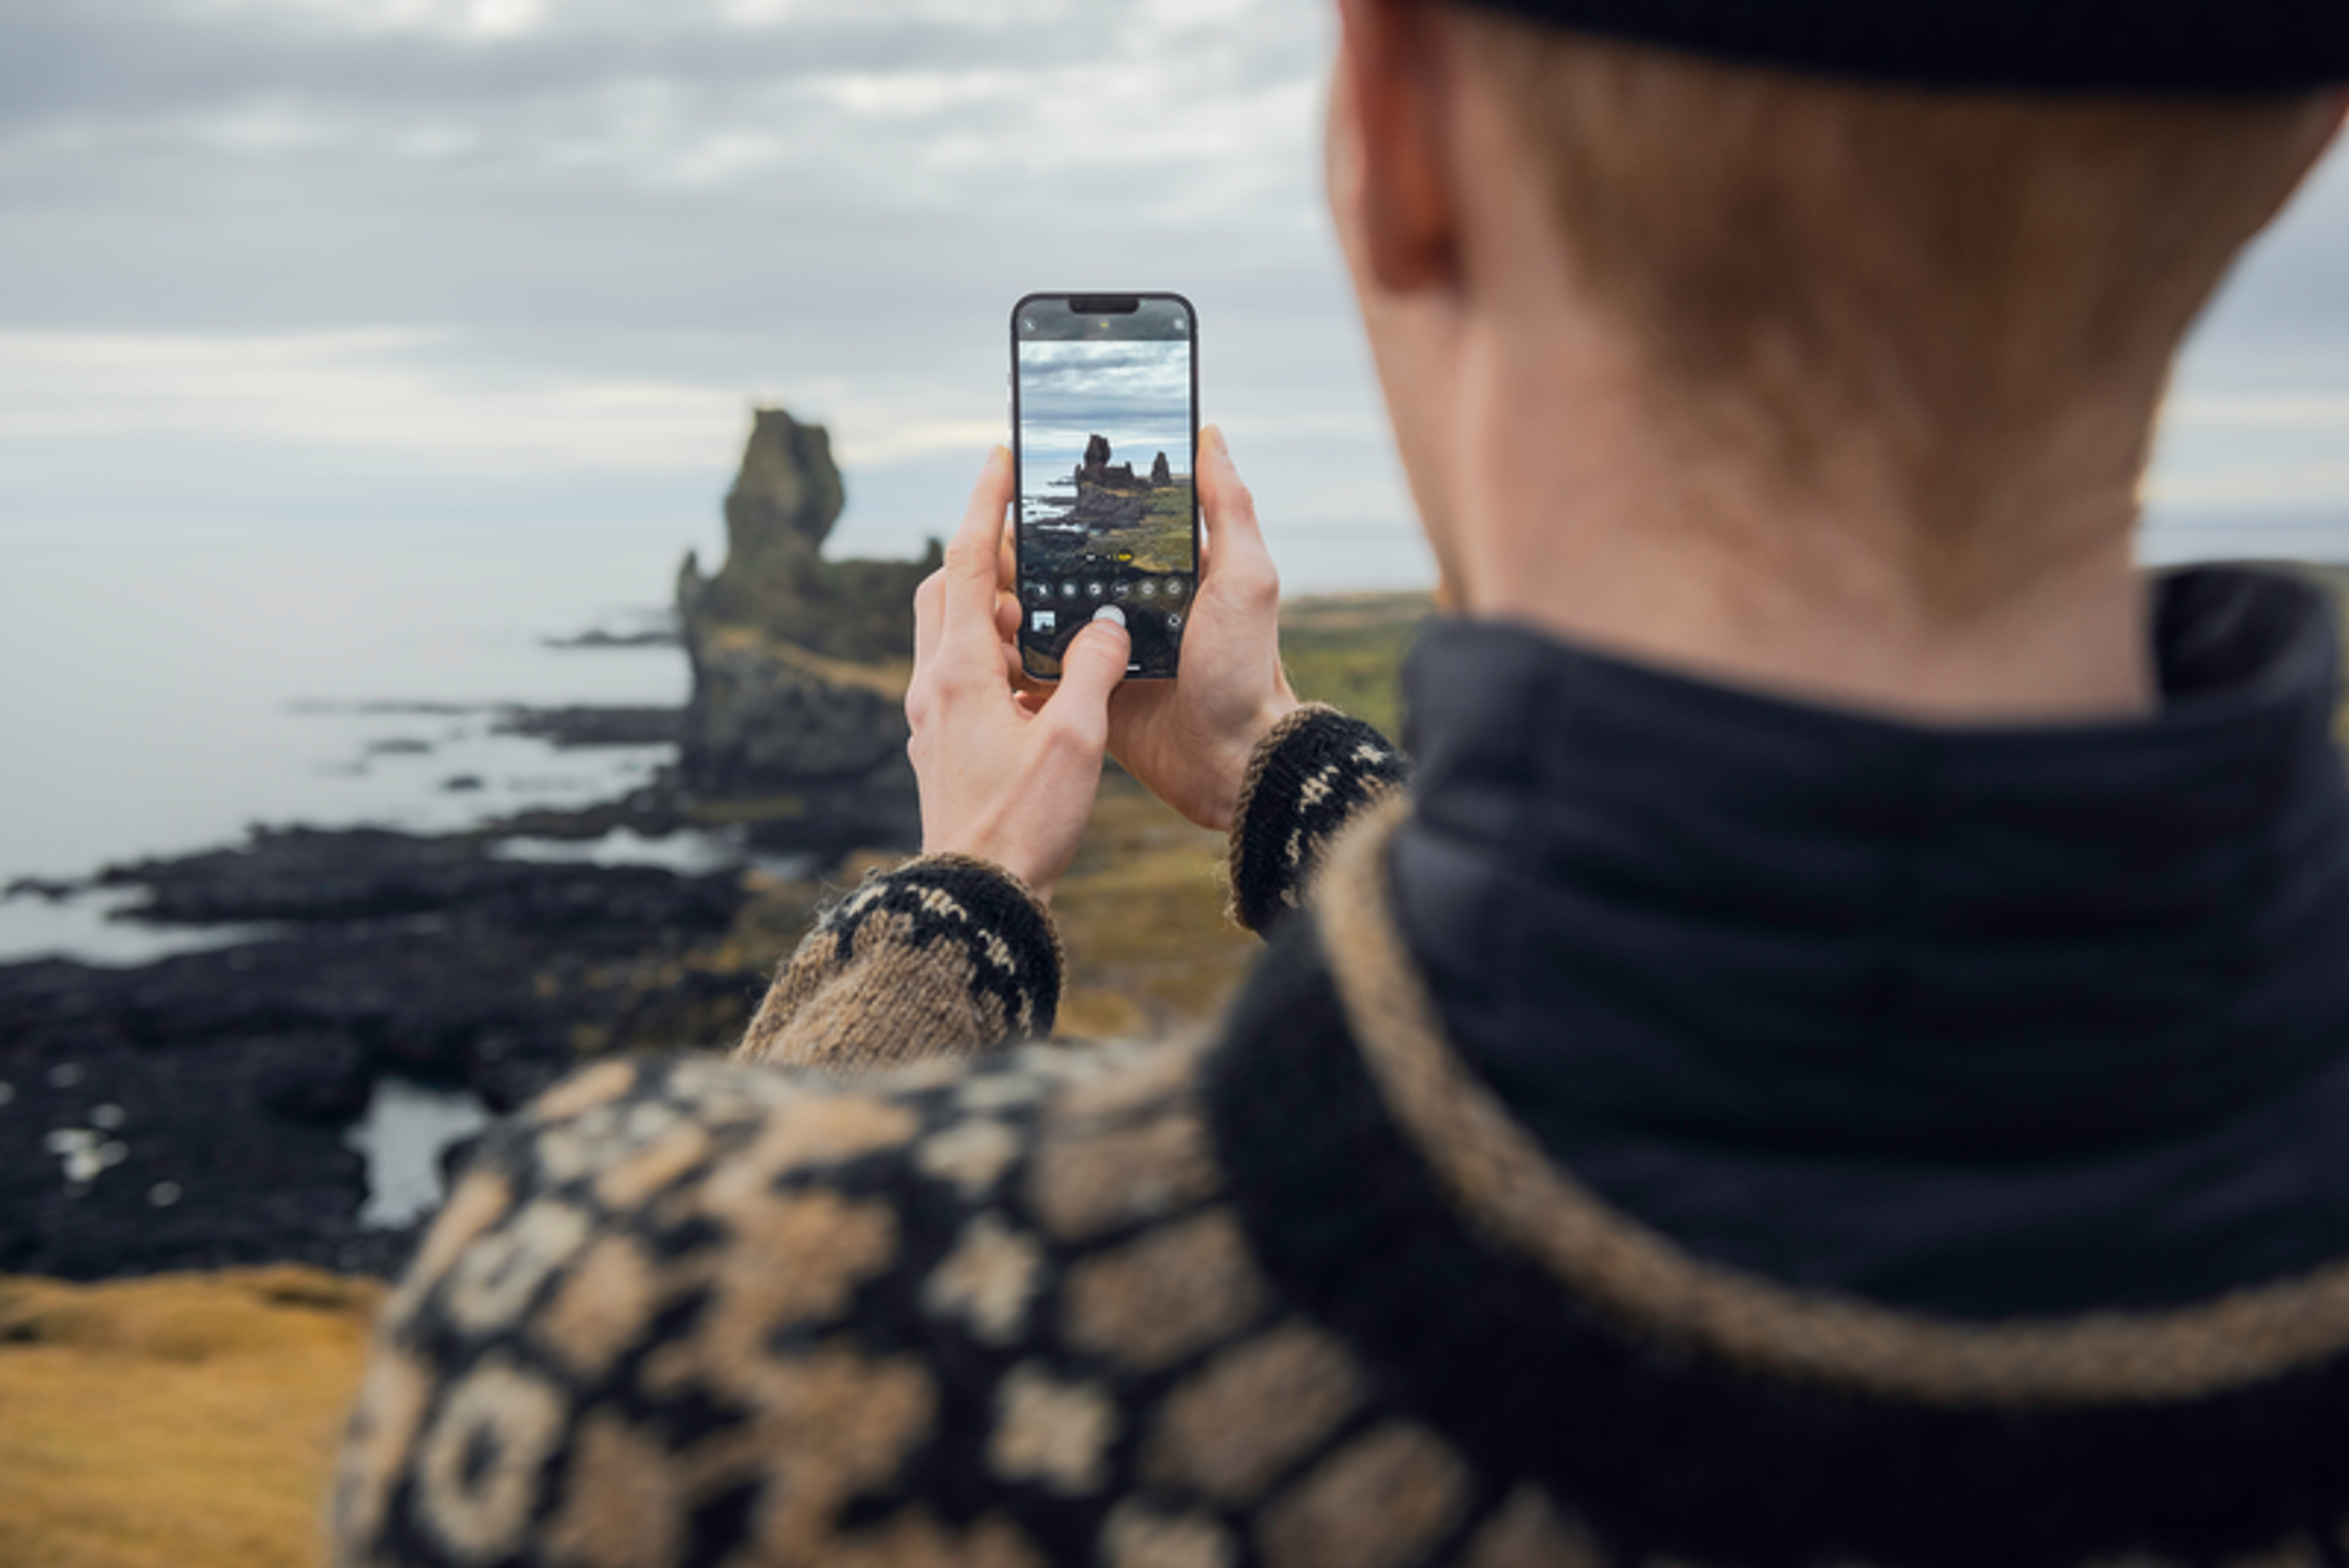 A person wearing knitted sweater taking a photo of a coastal rock formation